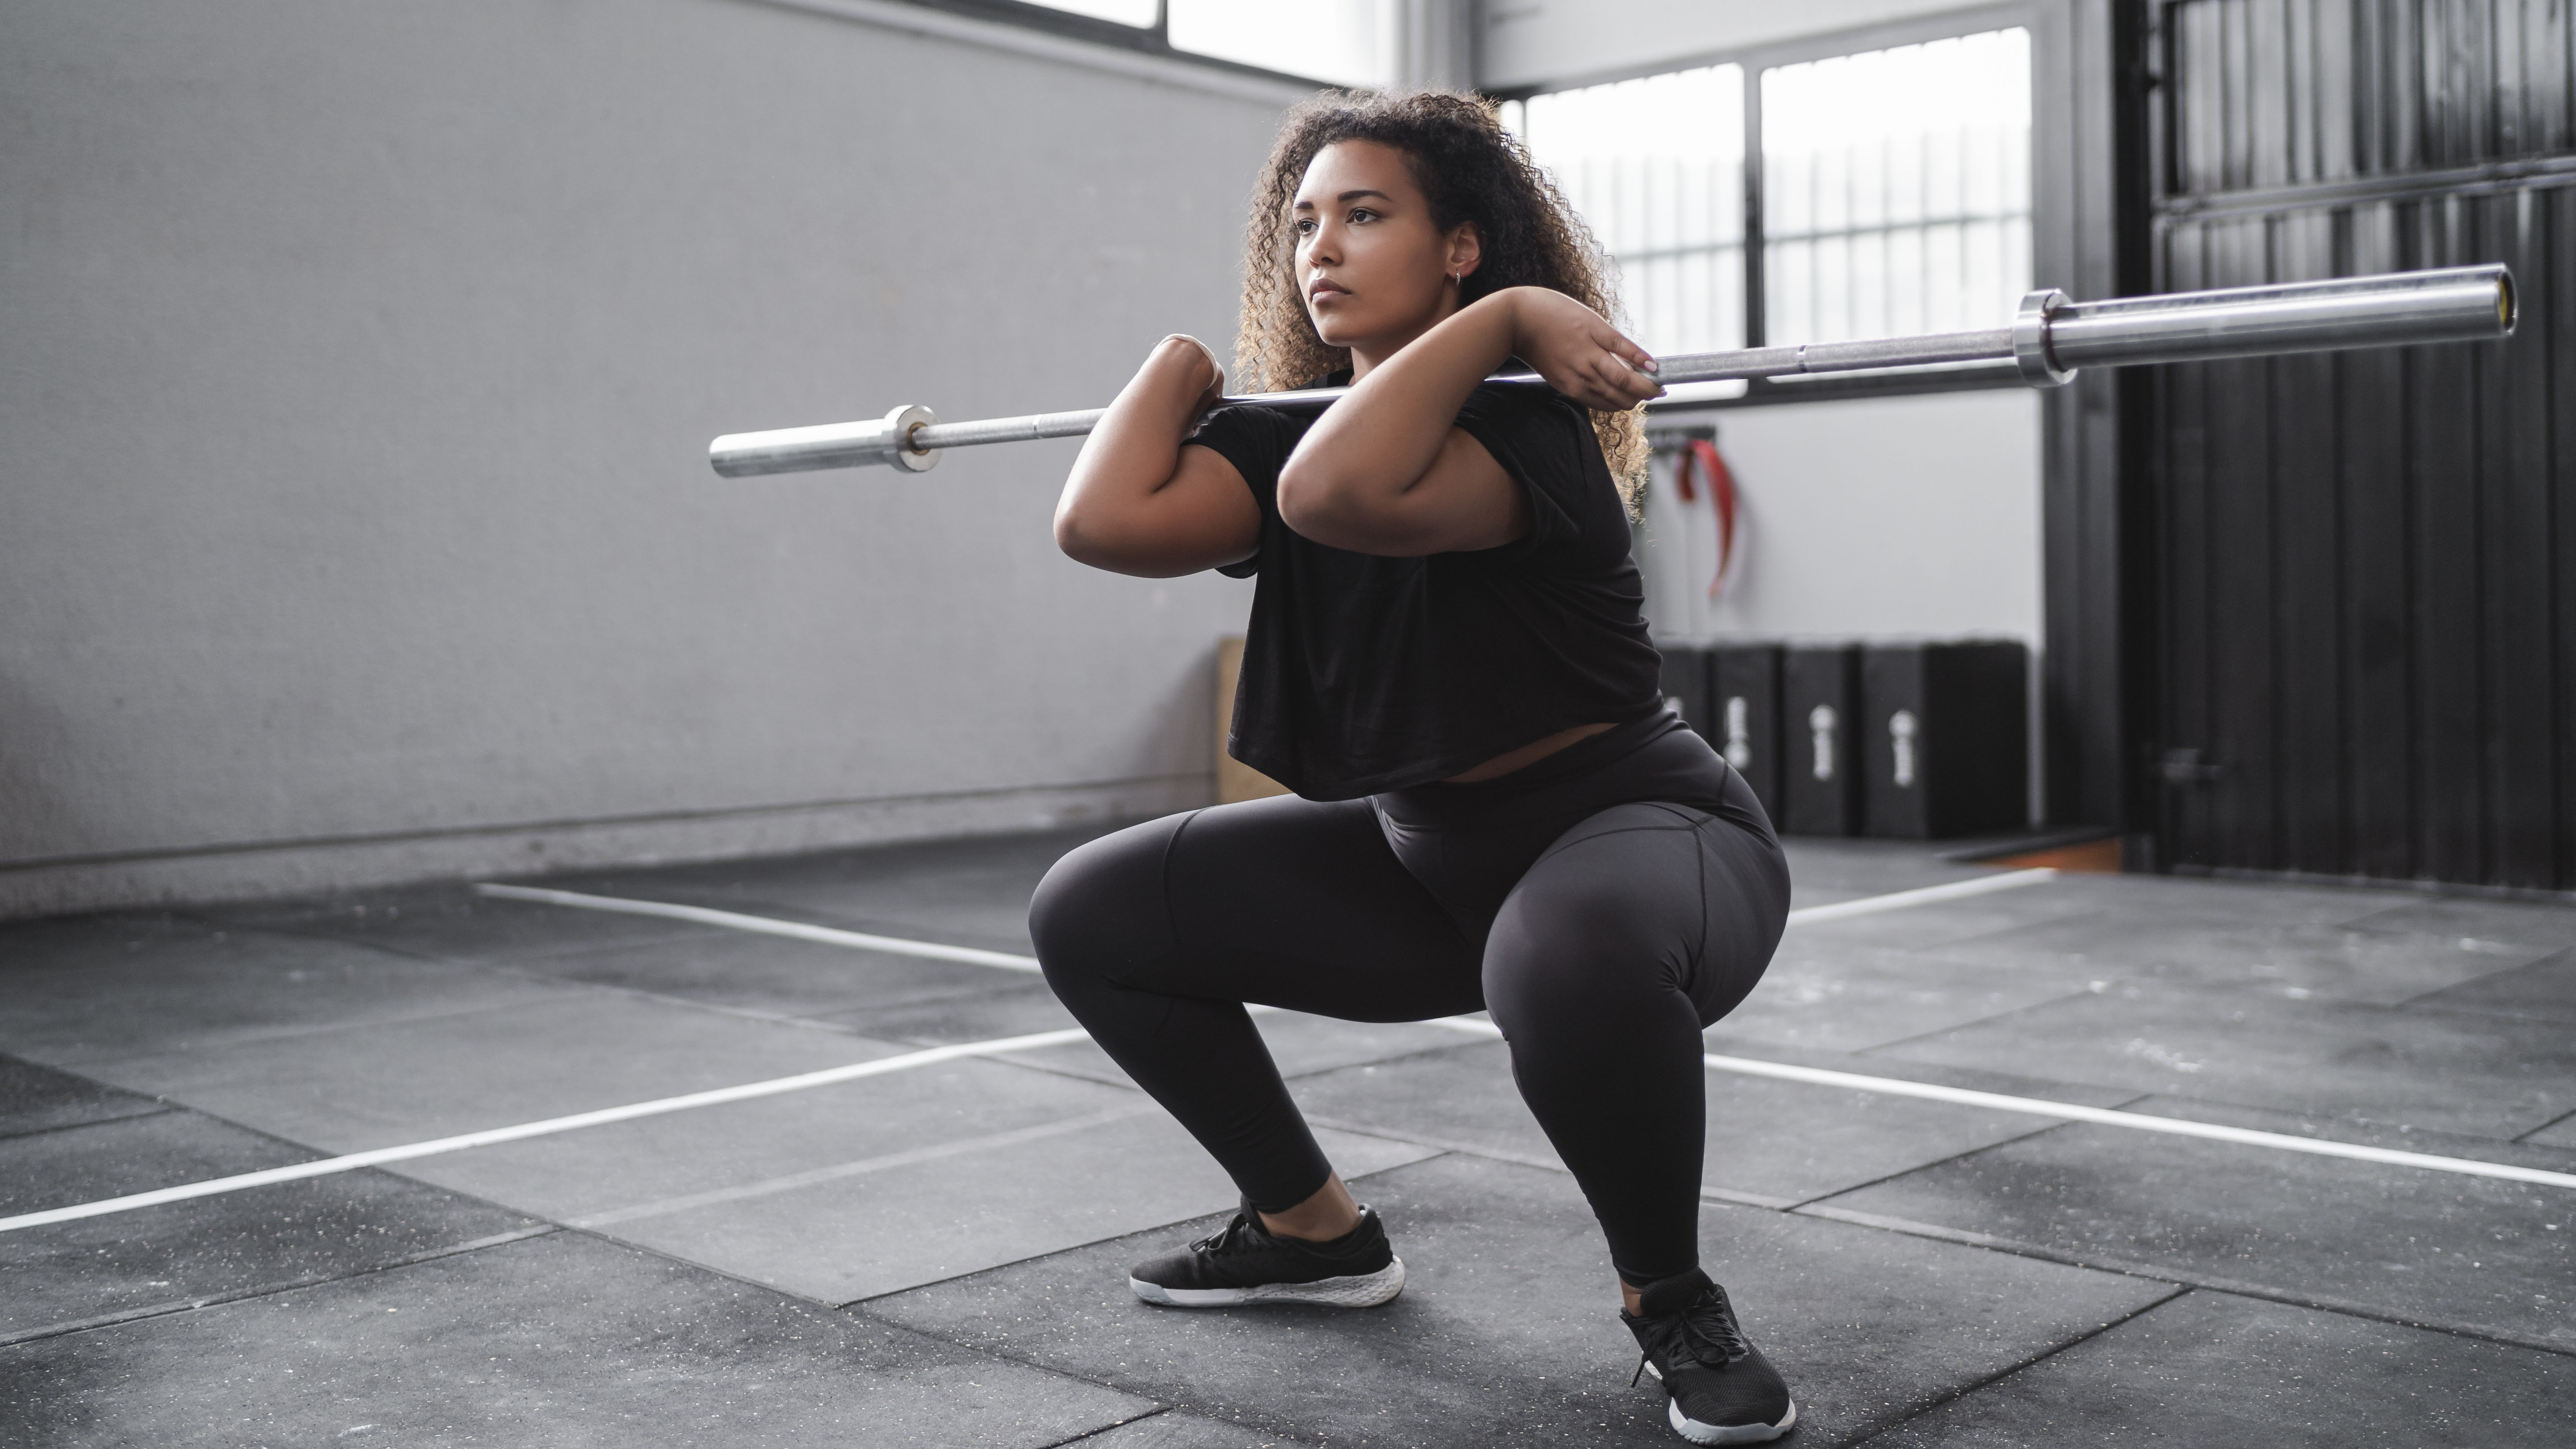 What are the benefits of squats?